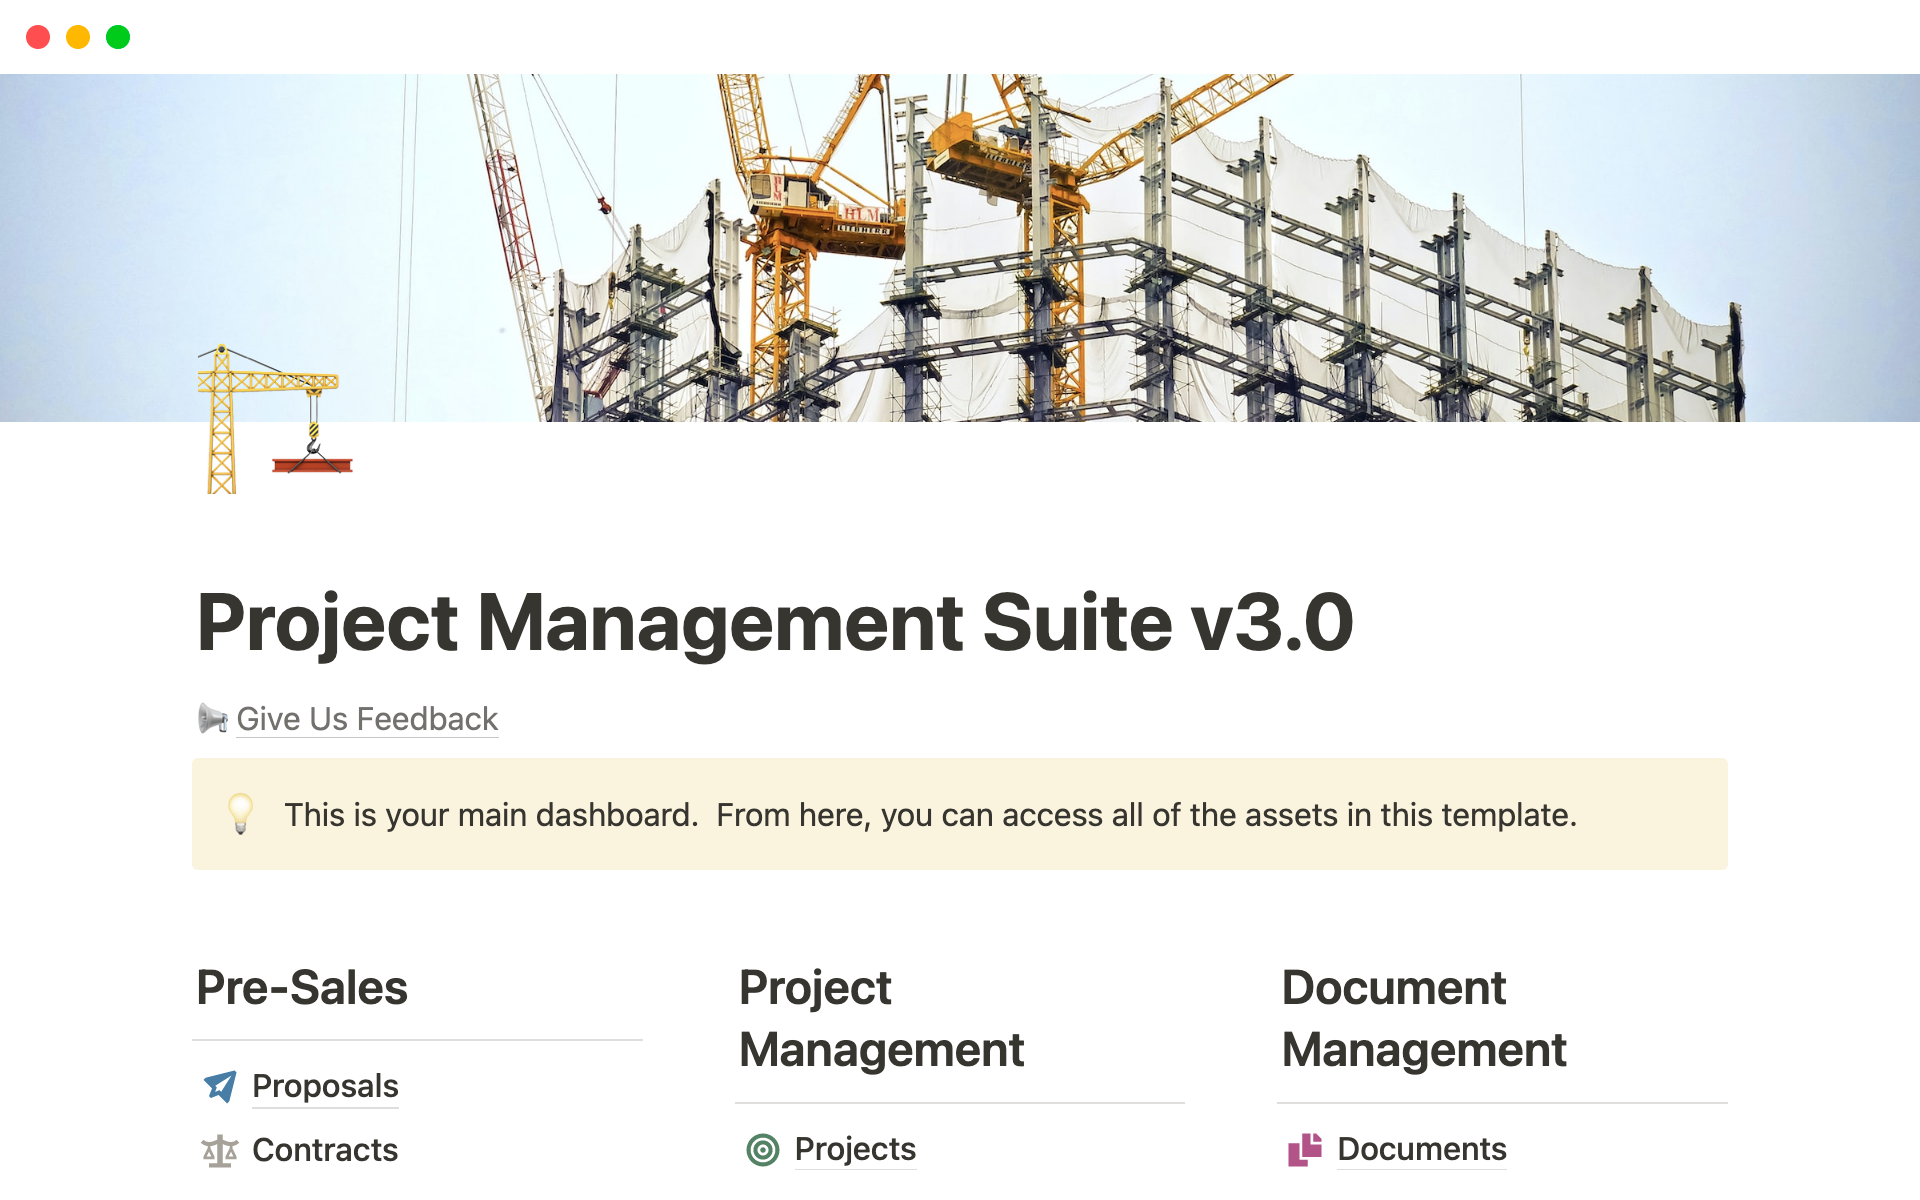 Provides a comprehensive project management suite for contractors and small businesses.